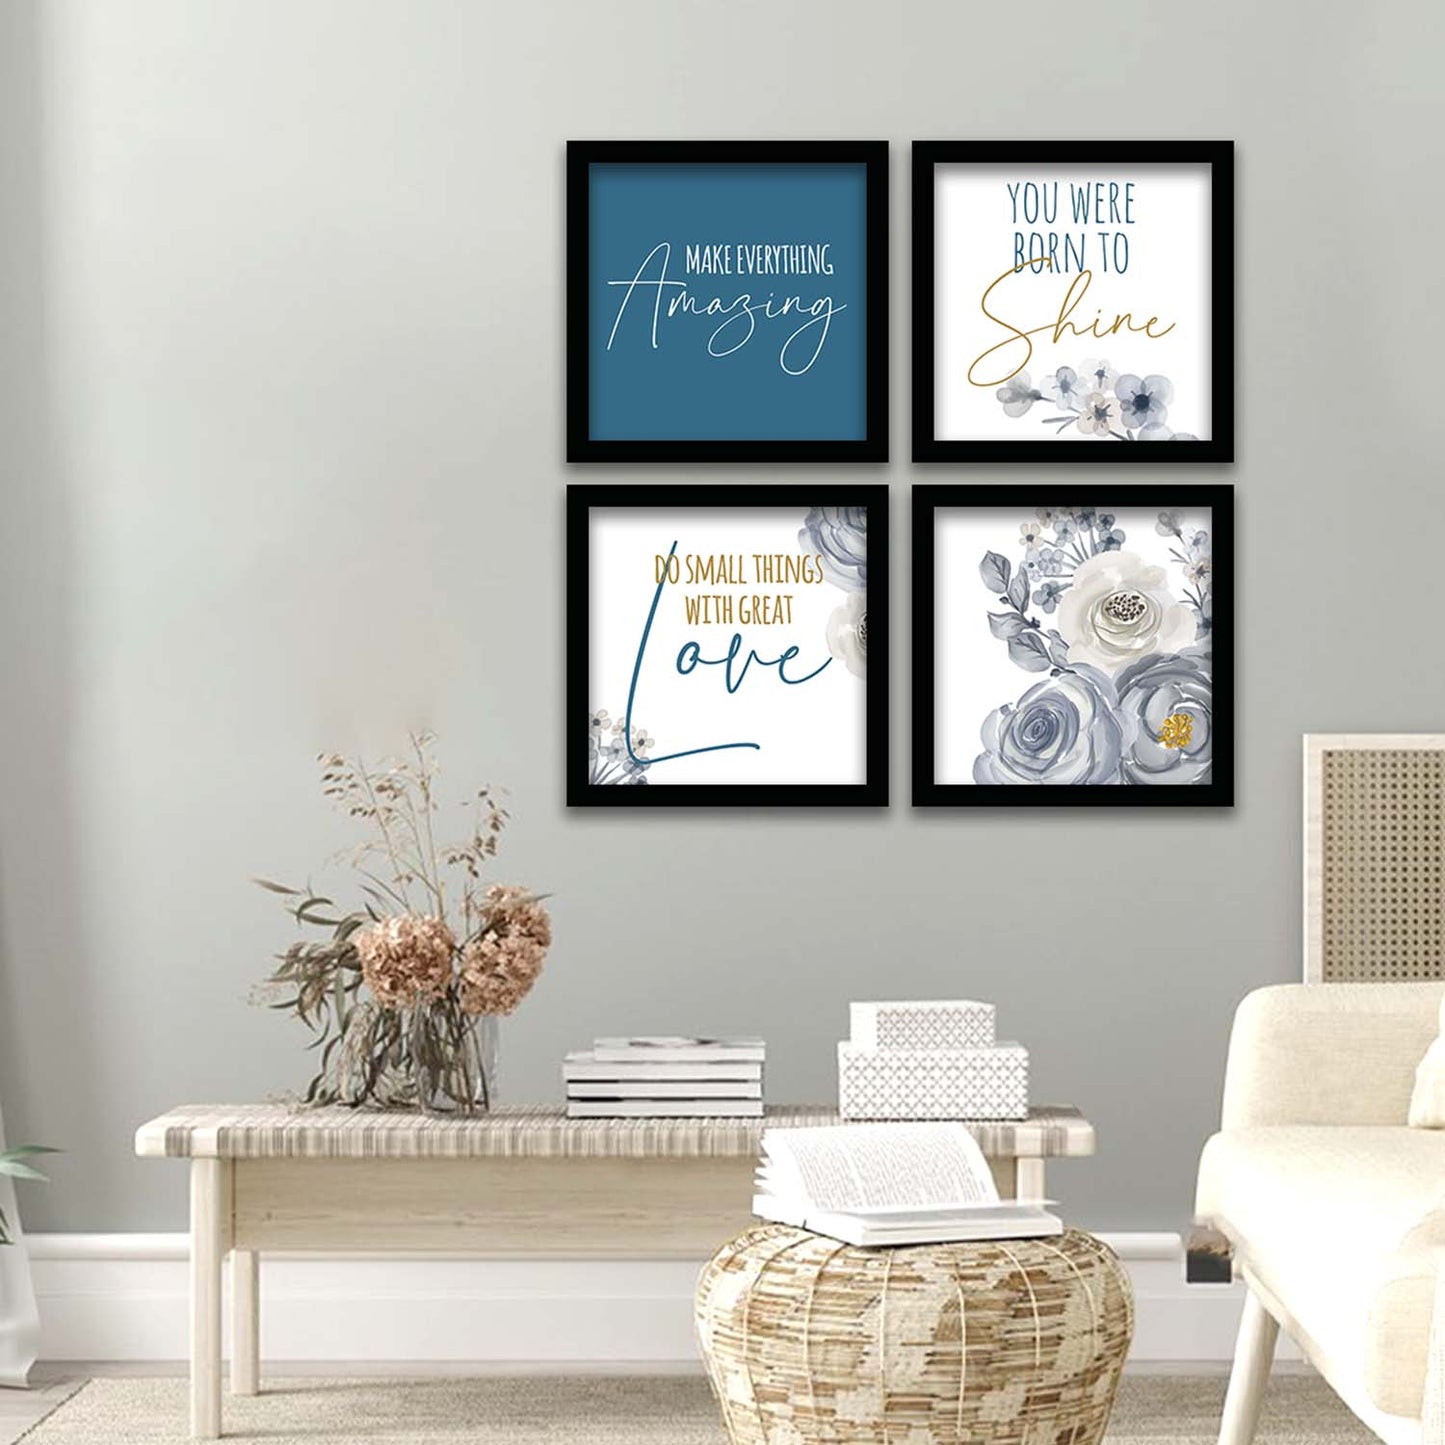 Motivational Wall Frames Posters Paintings For office study Room Home Decoration ( set of 4 )